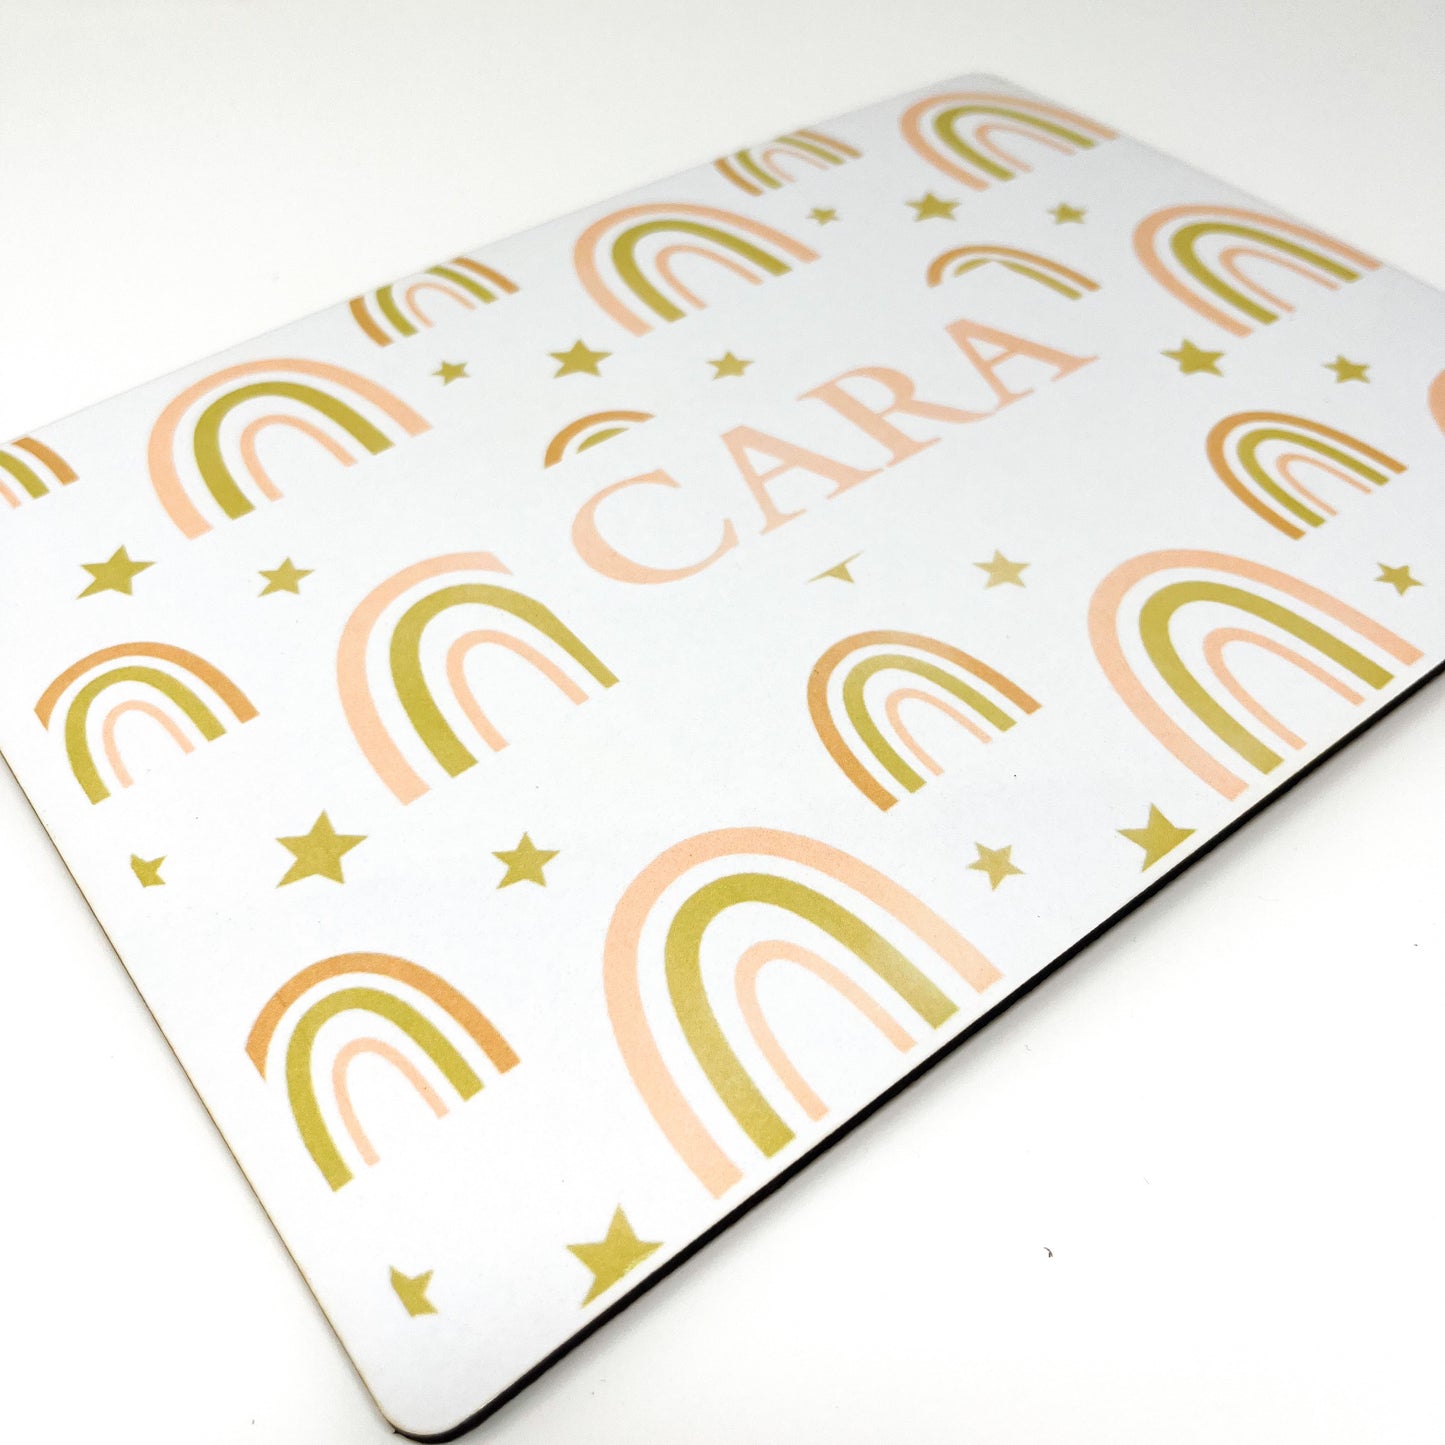 Children’s Personalised Placemat and Coaster Set  - Rainbows